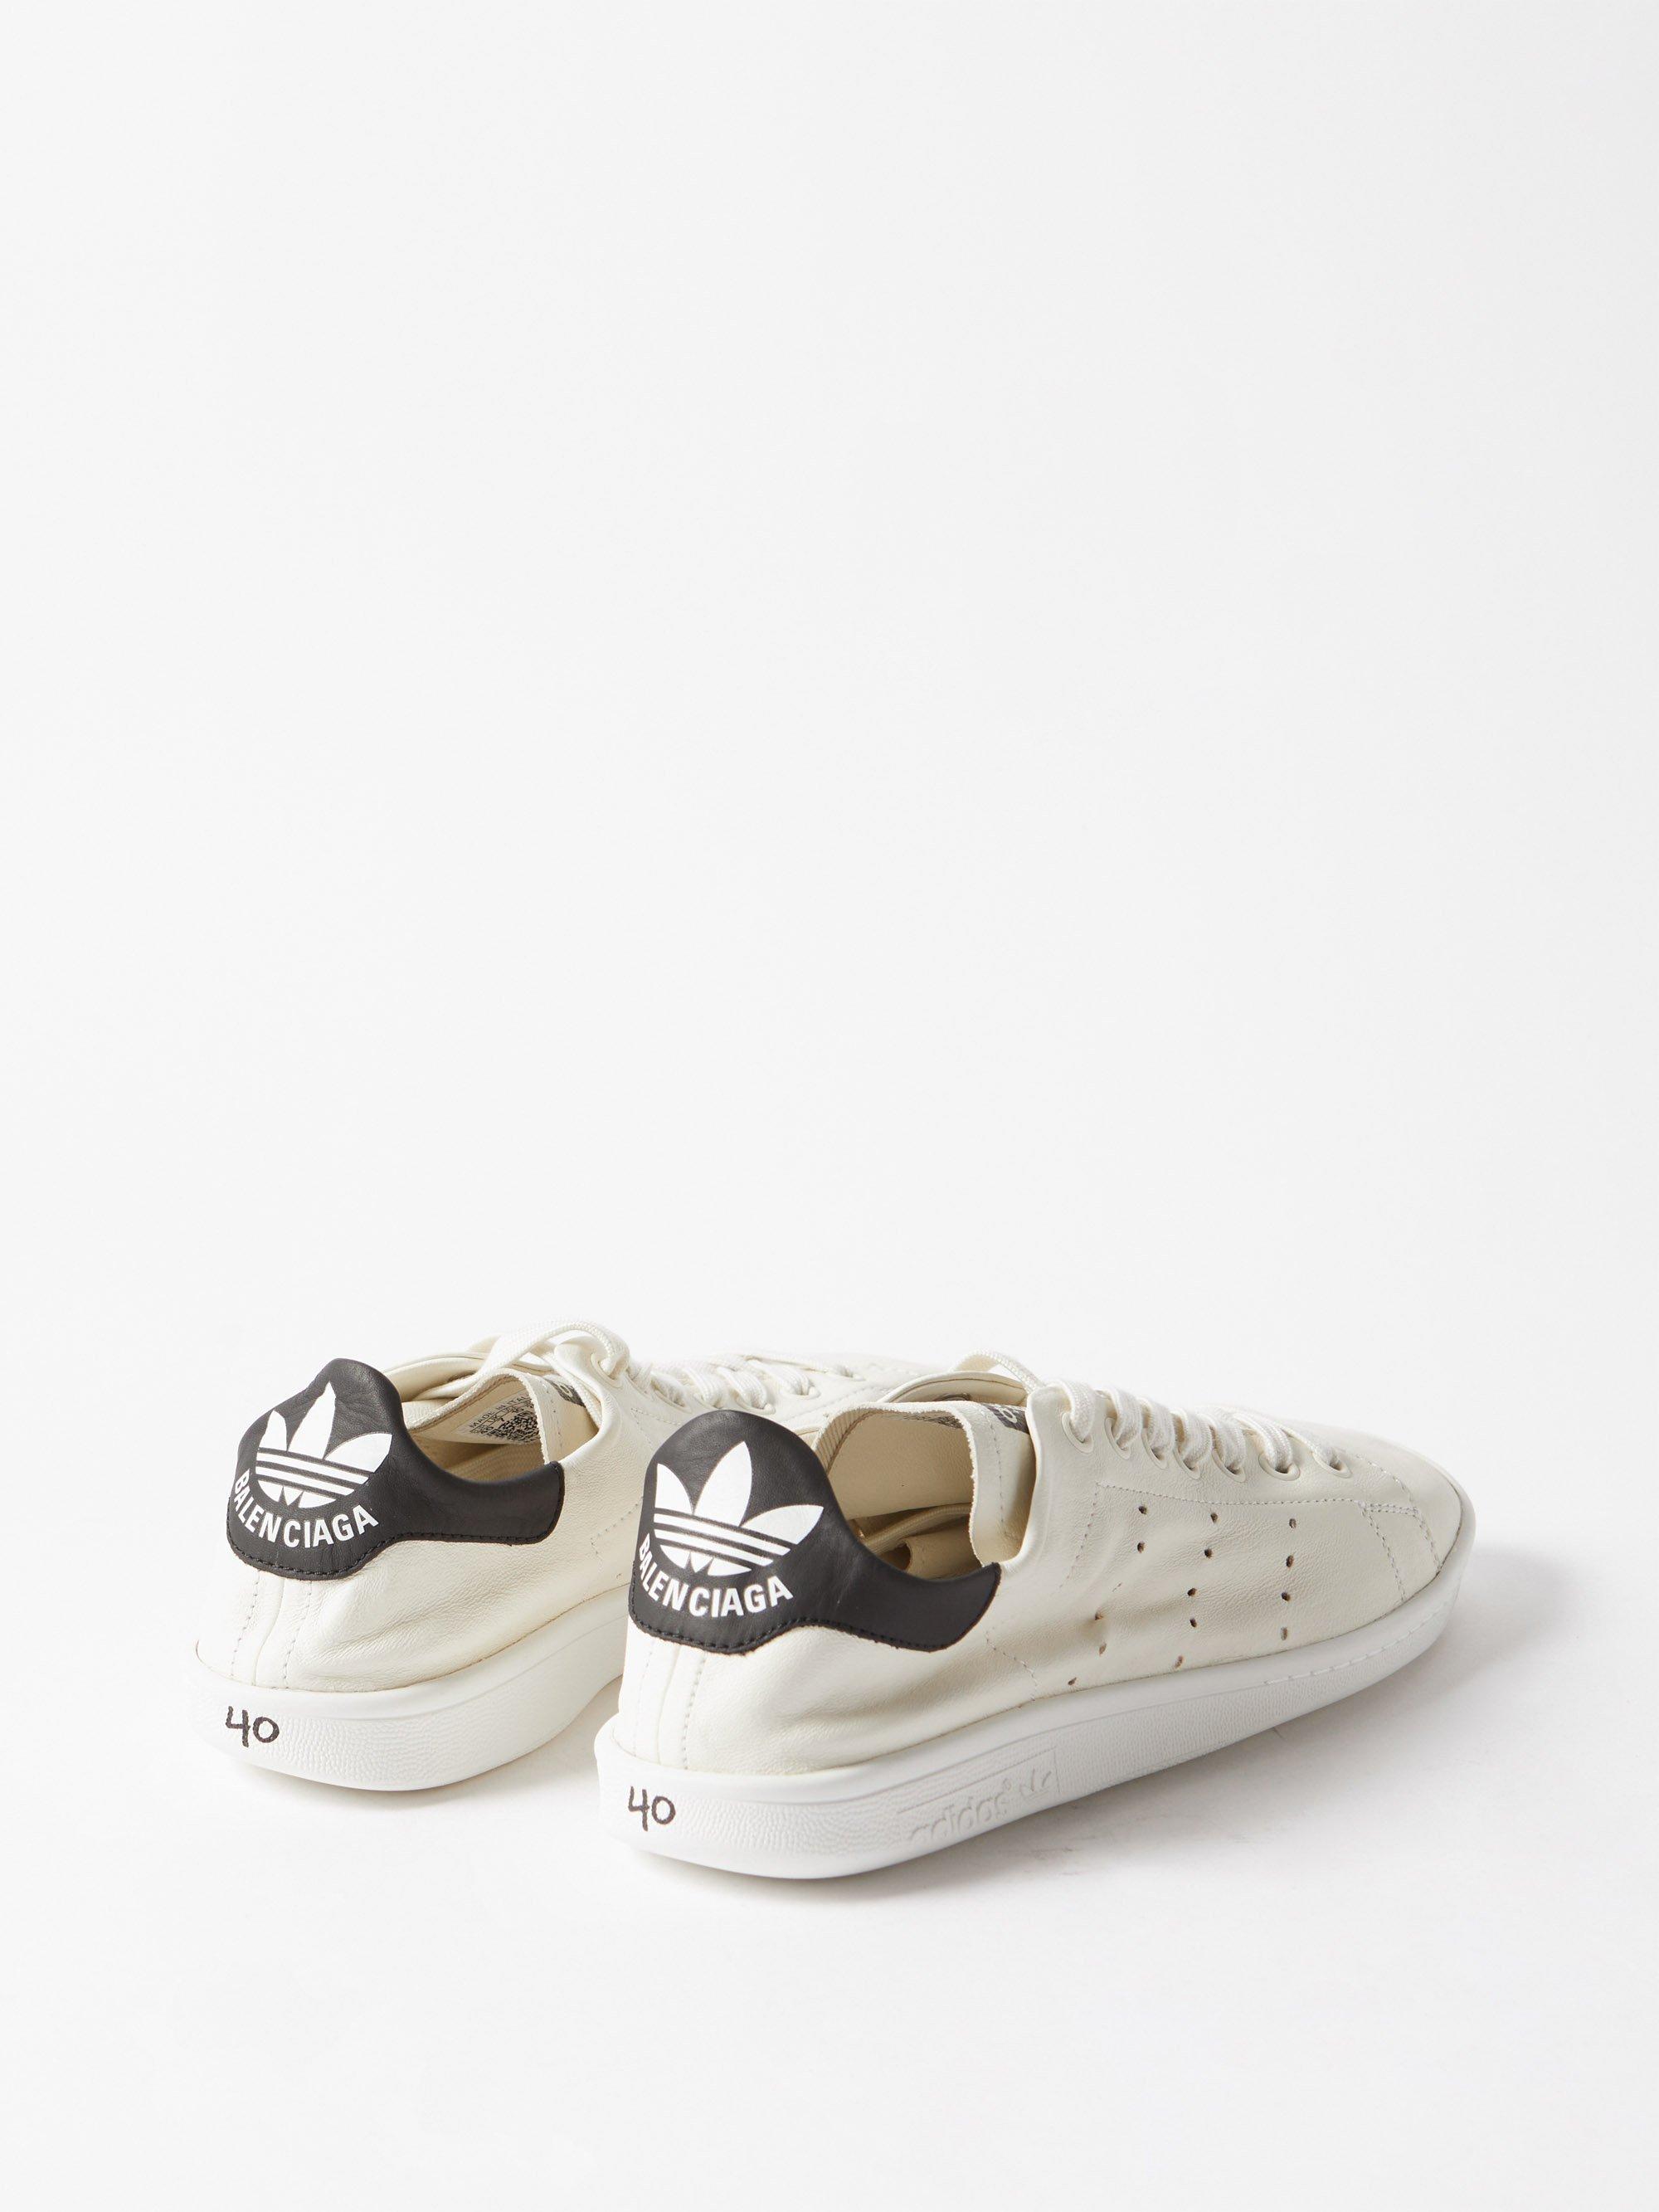 Balenciaga X Adidas Stan Smith Leather Trainers in White | Lyst